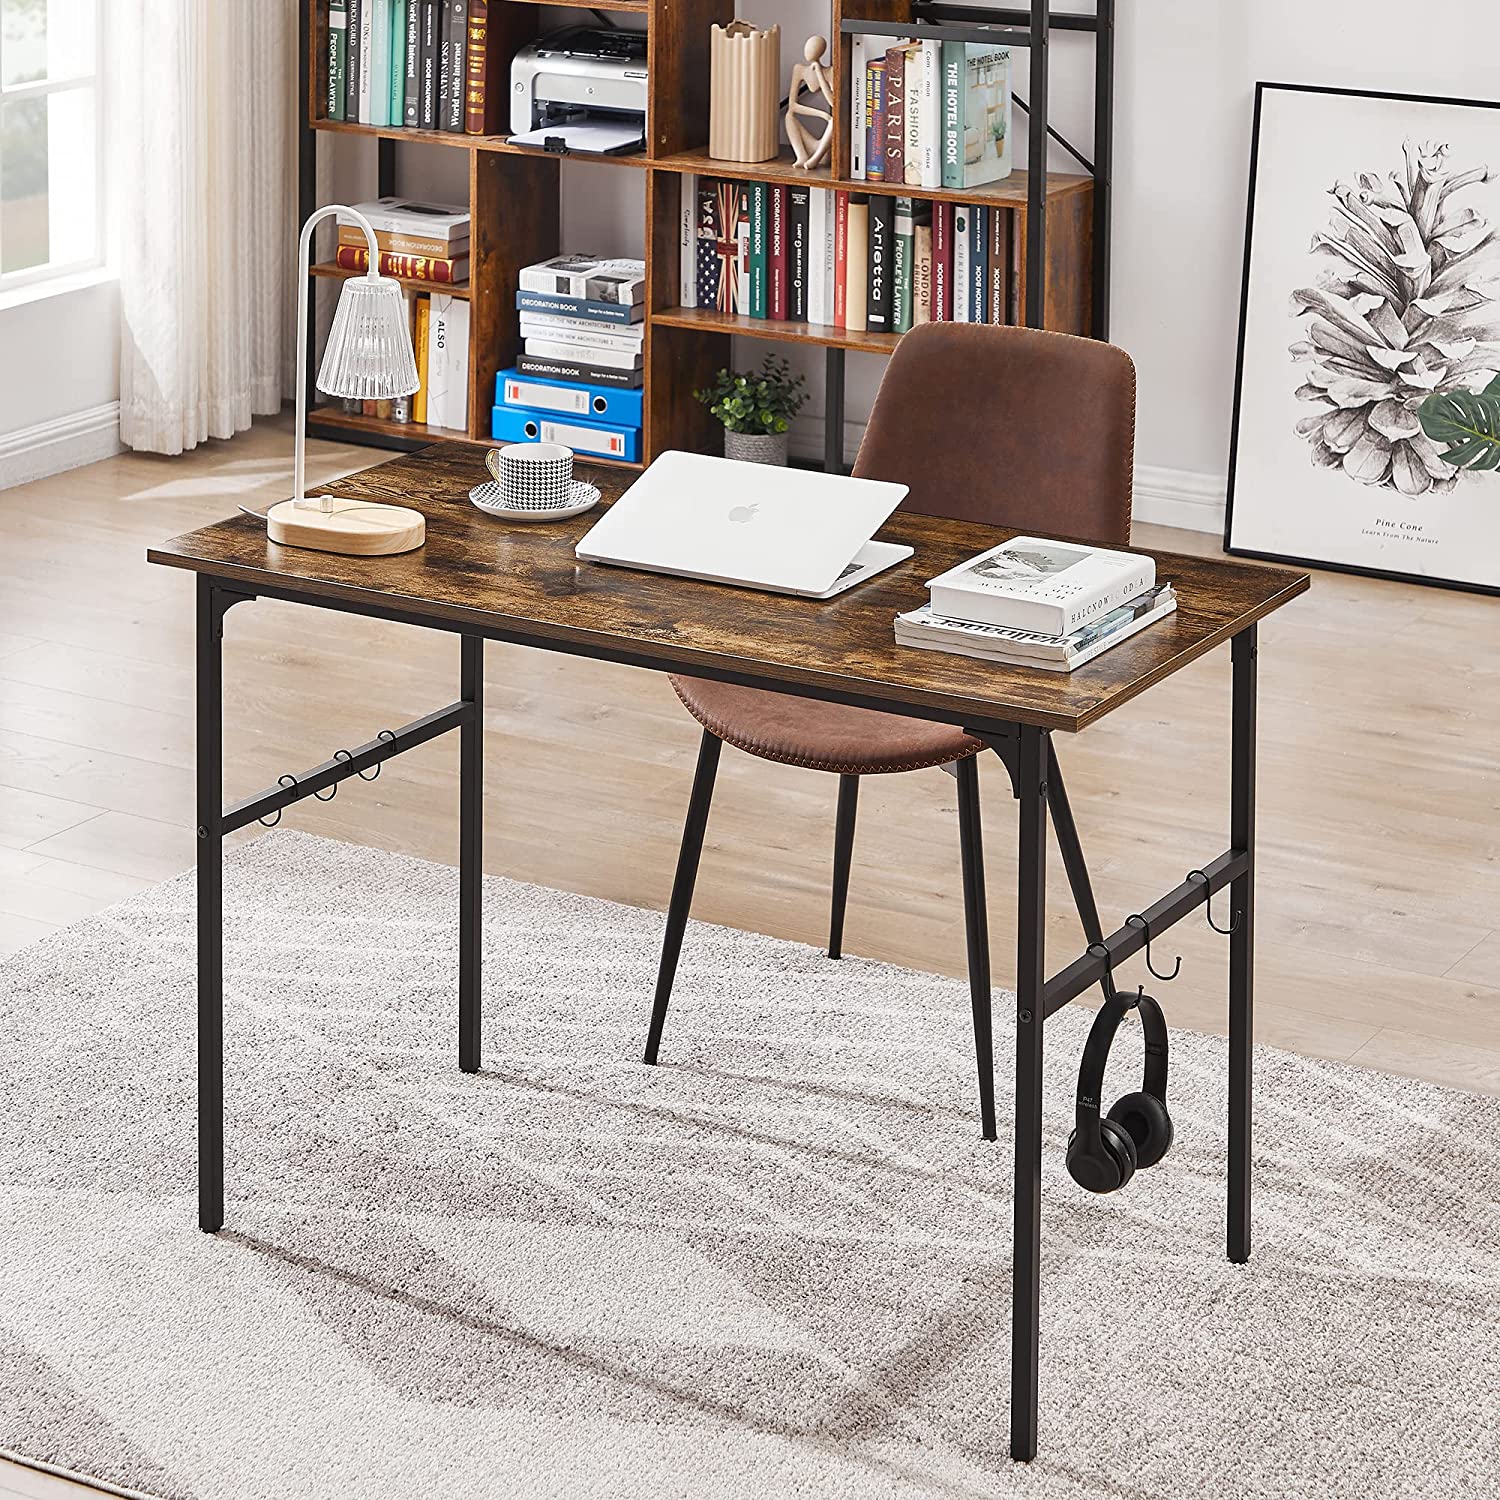 VECELO Computer Writing Desk, Study Table Workstation for Small Spaces with 6 Hooks & Adjustable Legs for Home Office